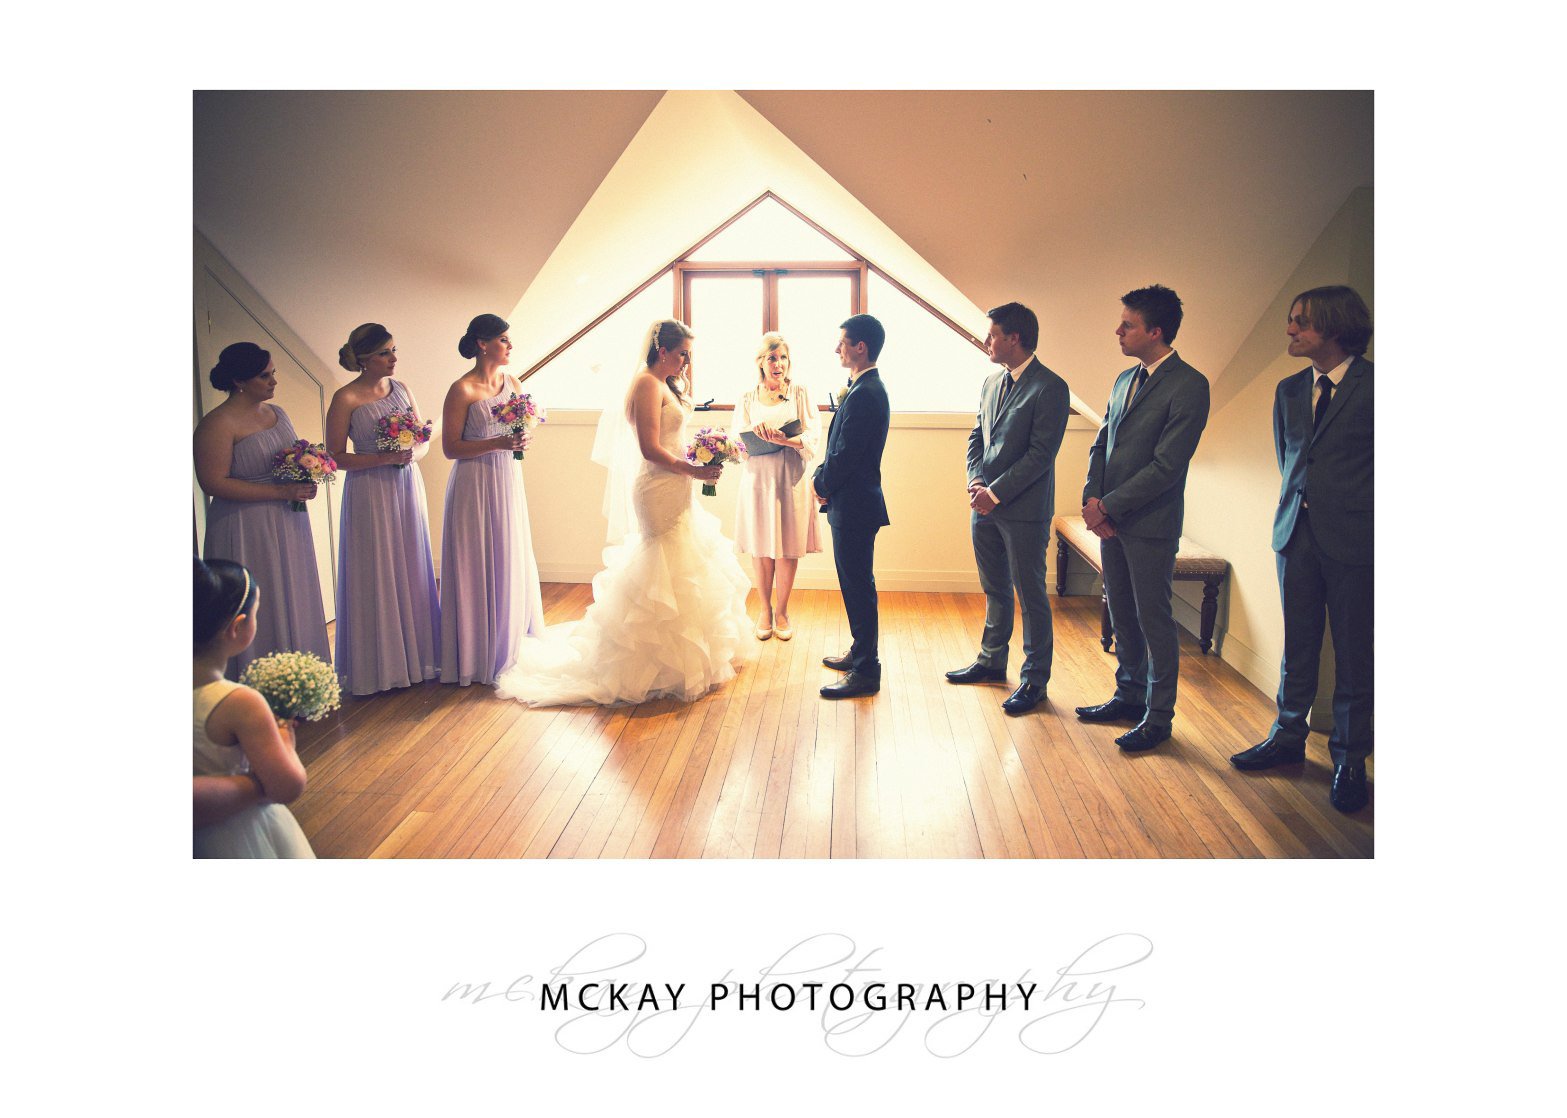 Wedding ceremony in the gallery upstairs at Centennial Vineyards